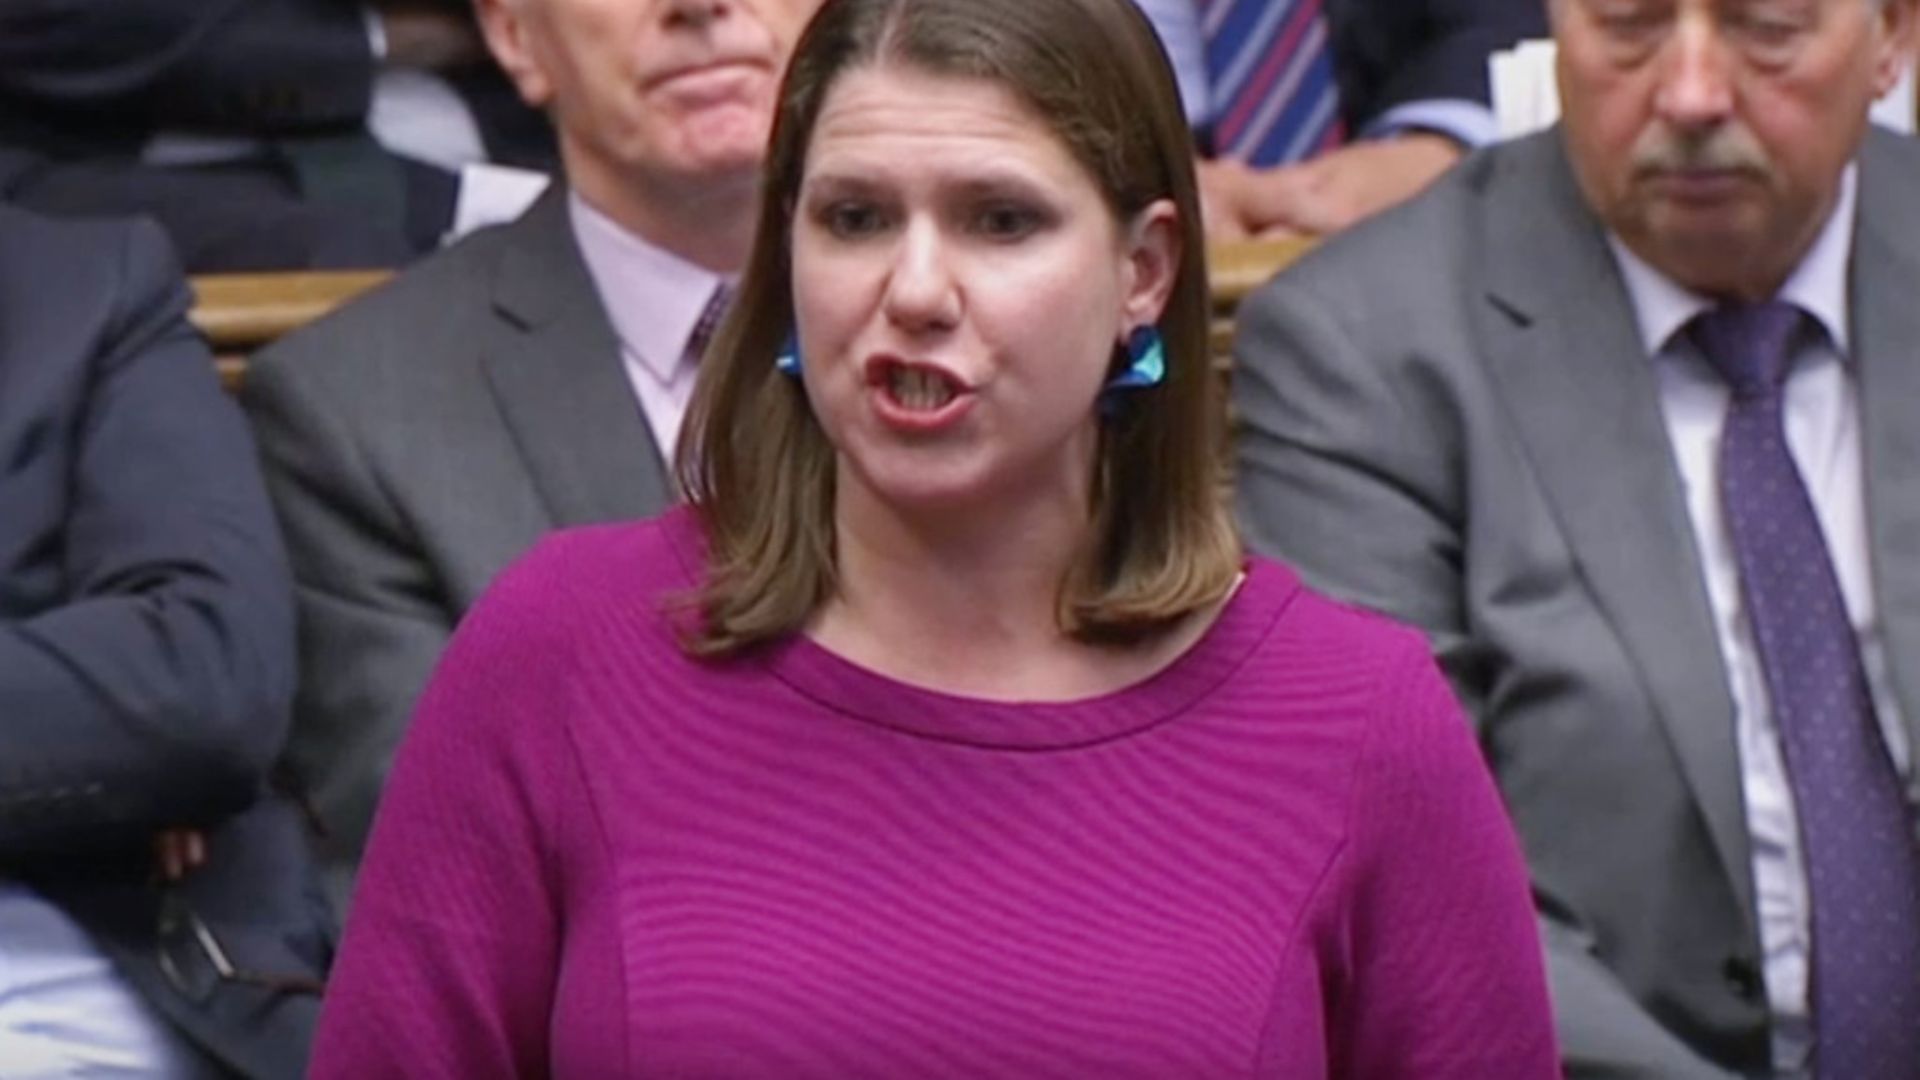 Liberal Democrat leader Jo Swinson in the House of Commons. Photograph: PA. - Credit: PA Wire/PA Images